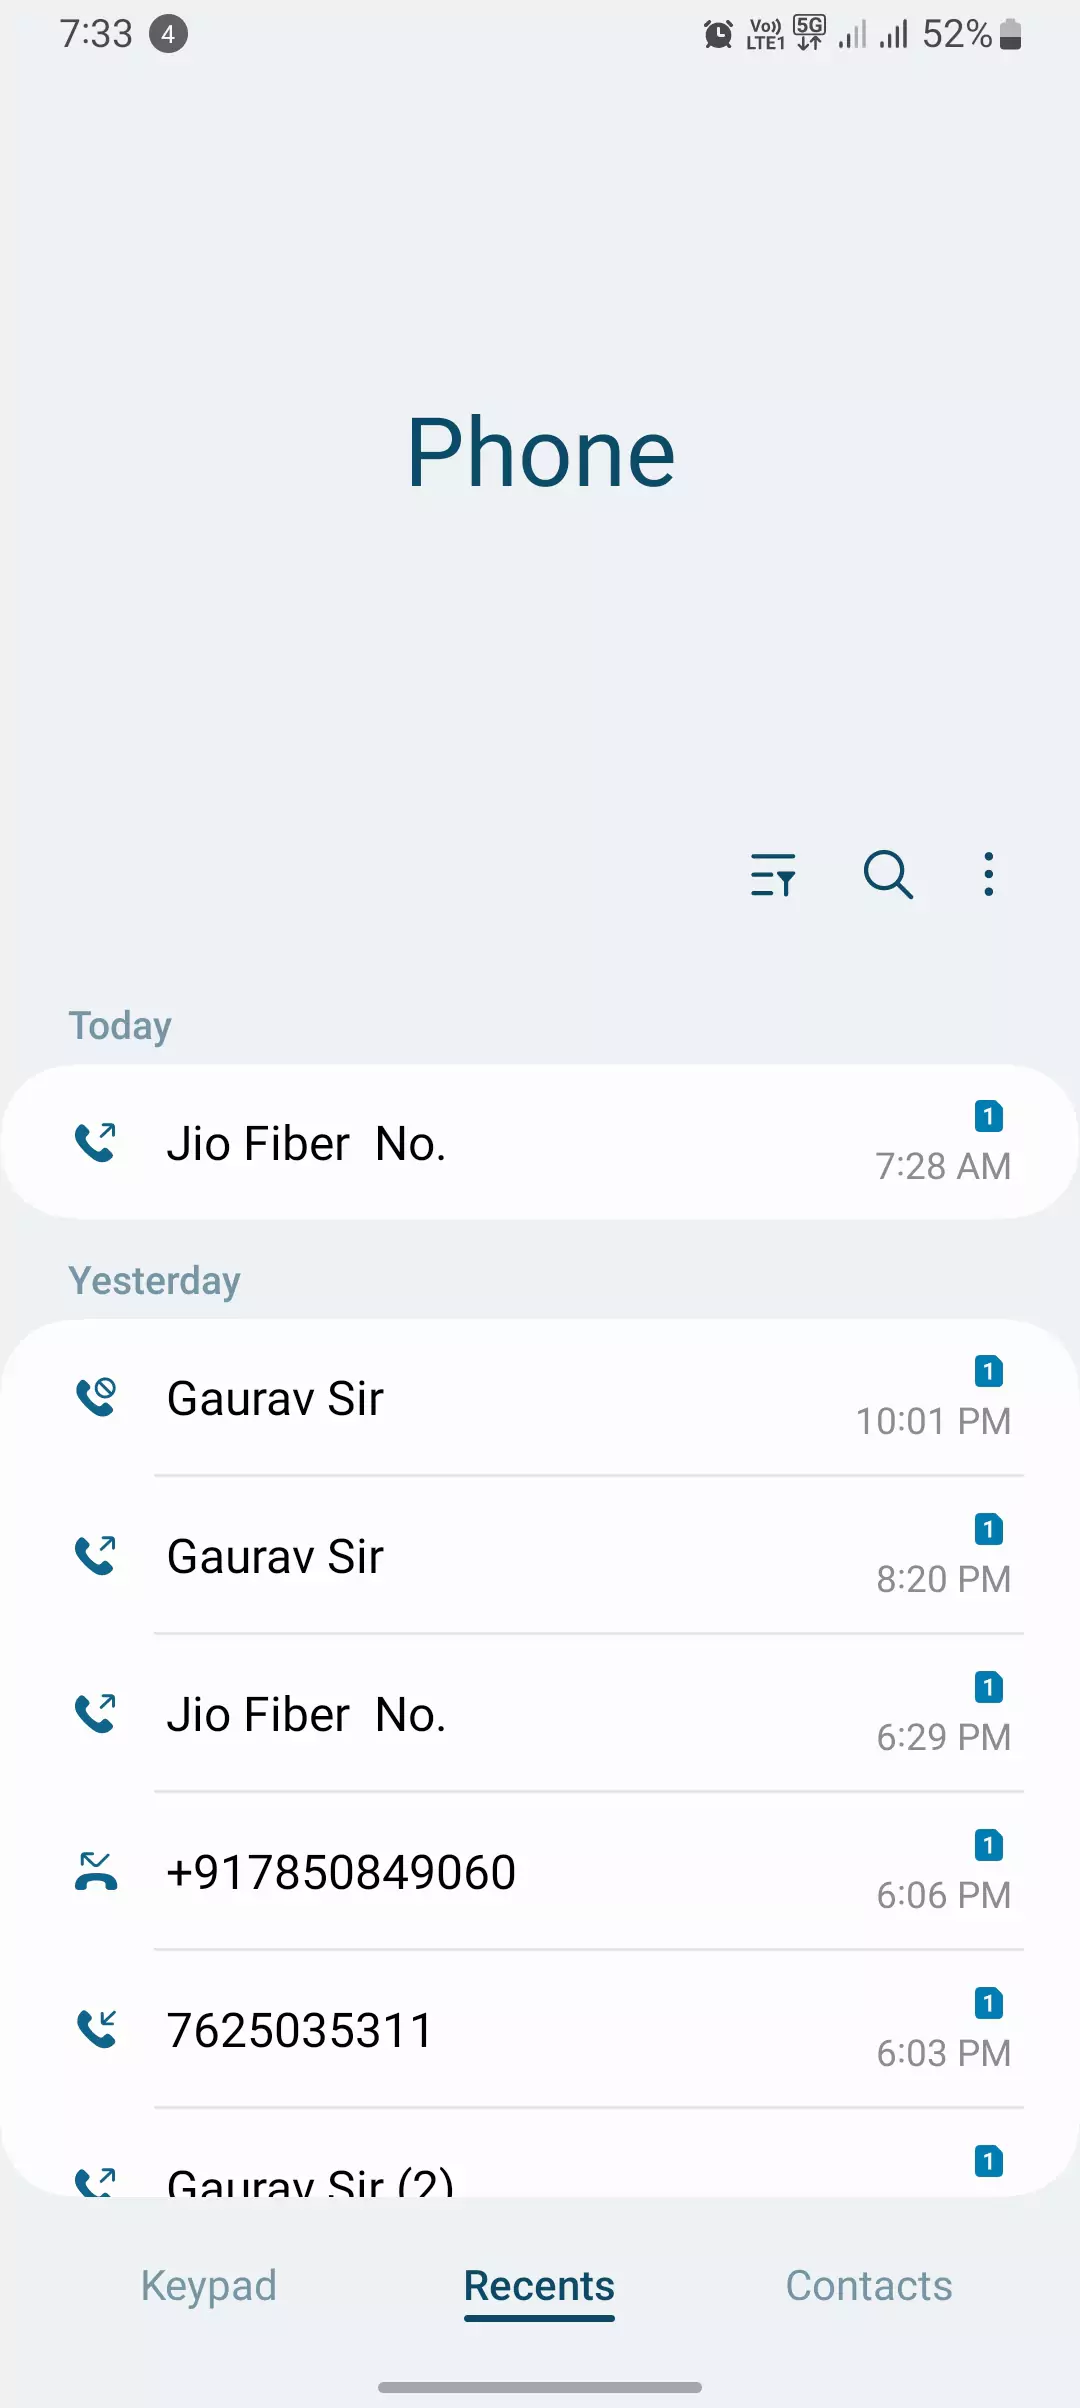 screenshot of all the recent calls from samsung phone app